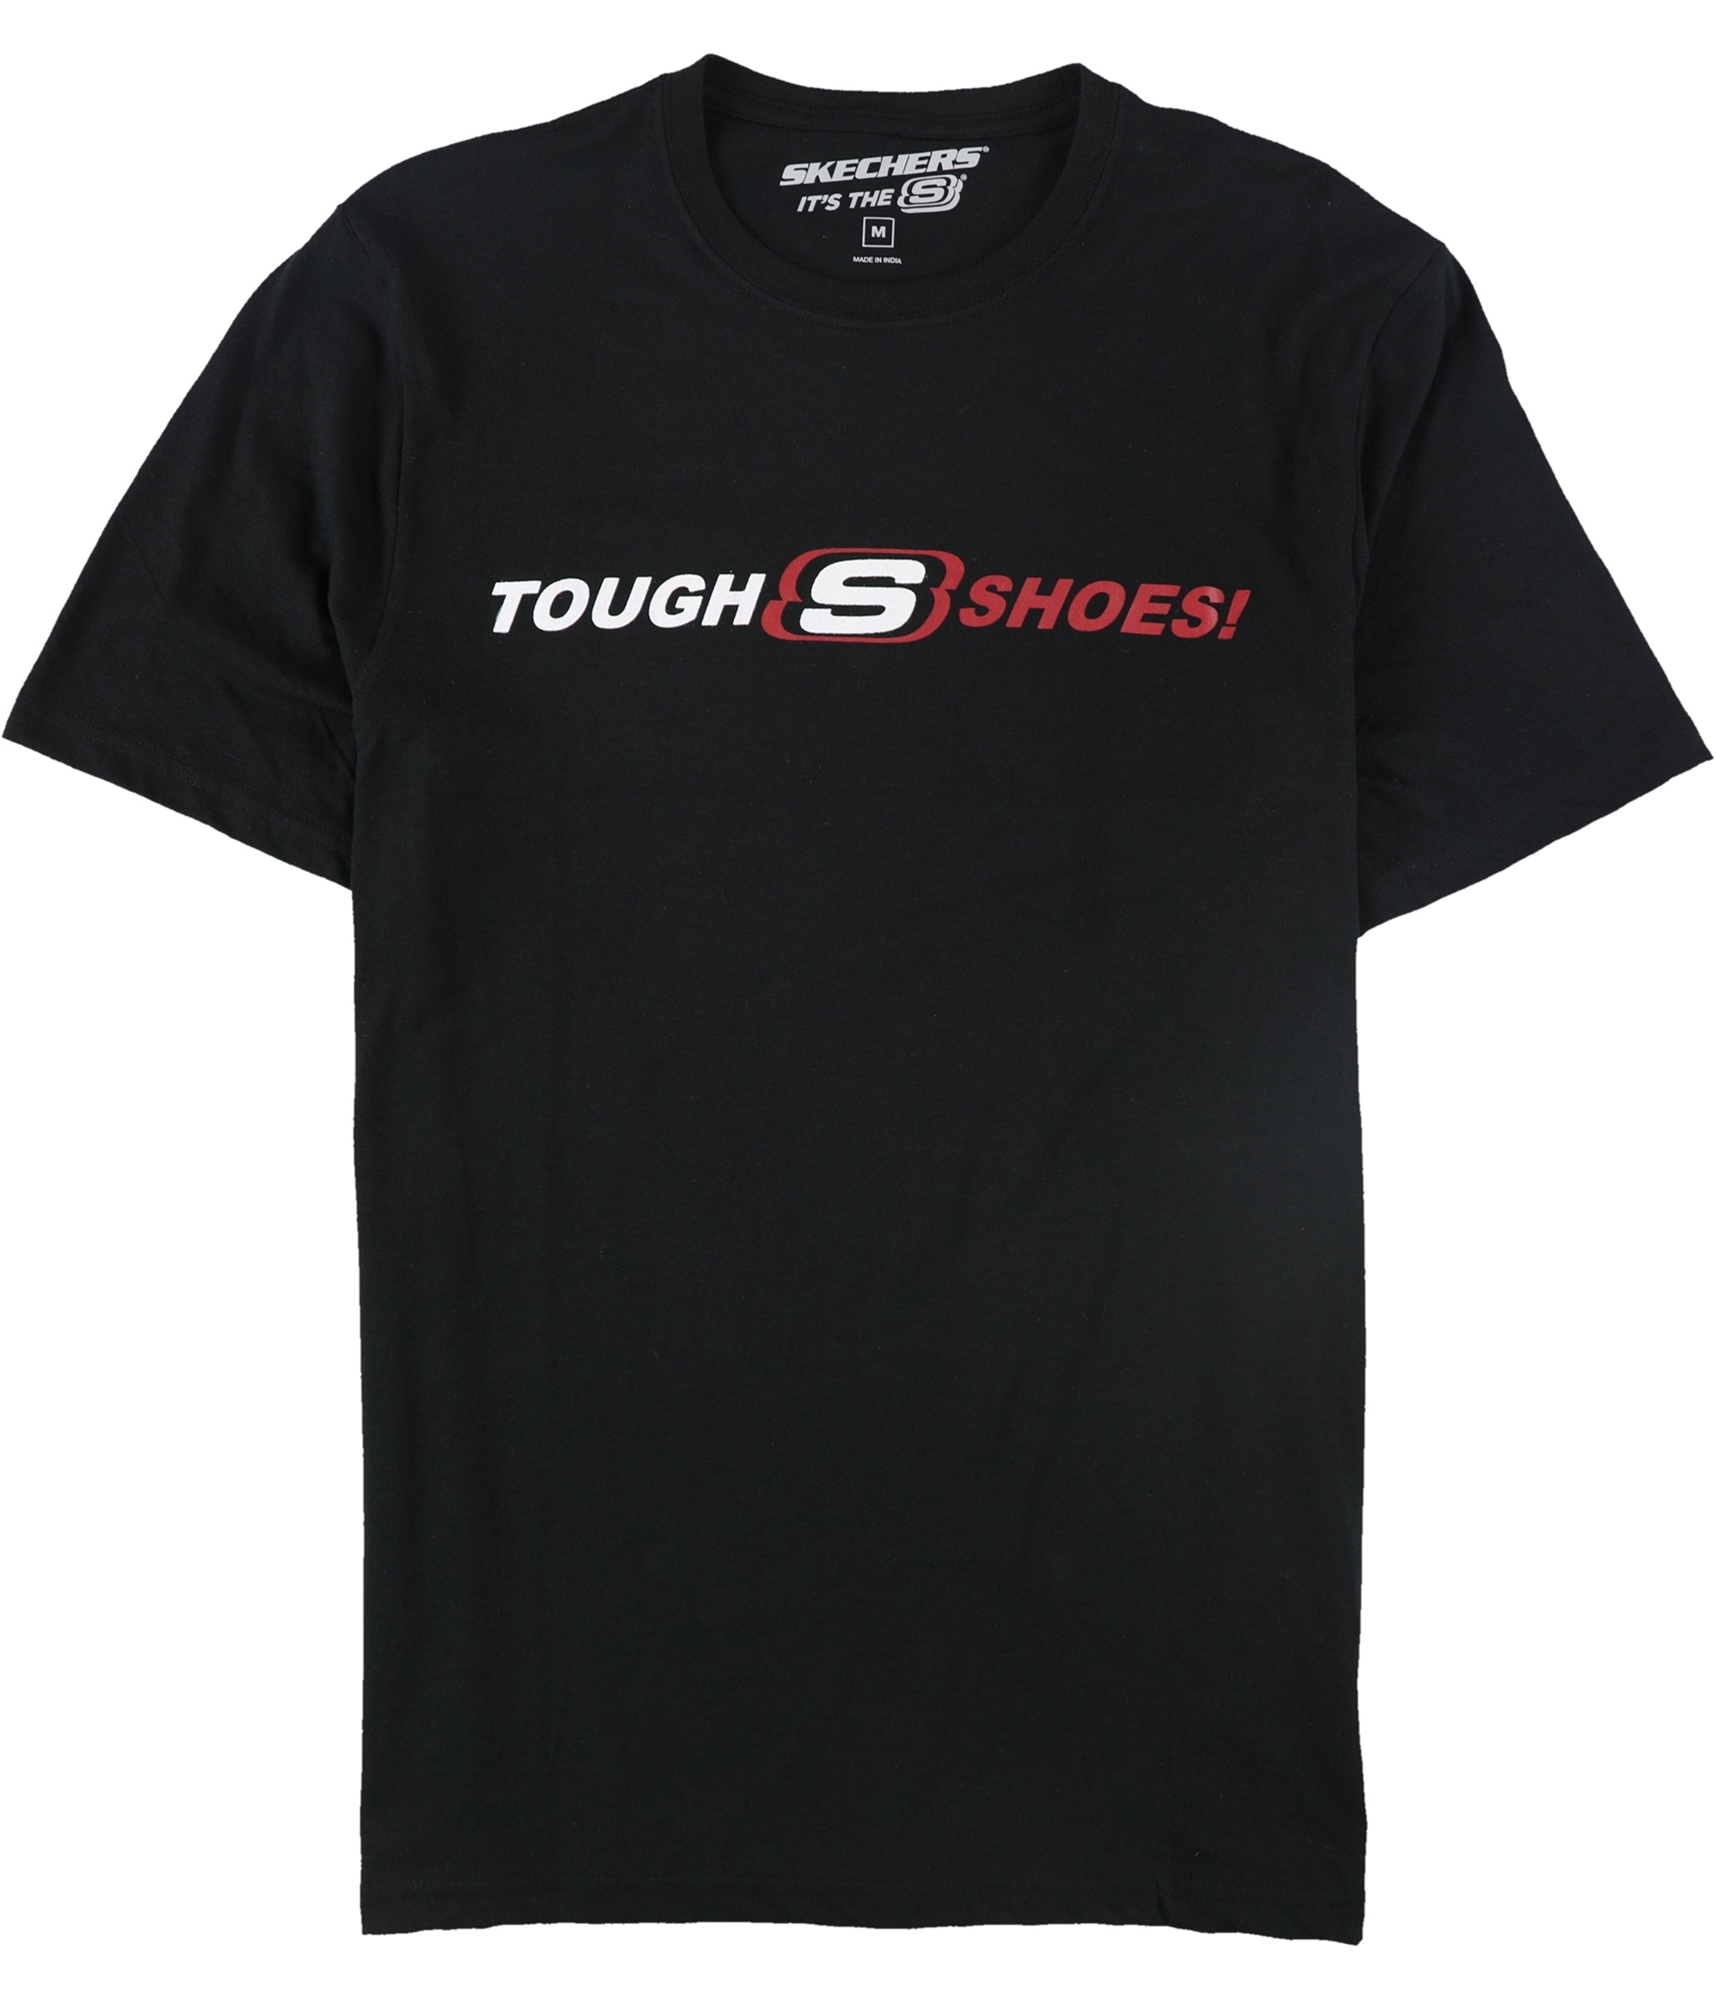 Buy a Skechers Mens | Graphic Shoes! Tough T-Shirt Tagsweekly